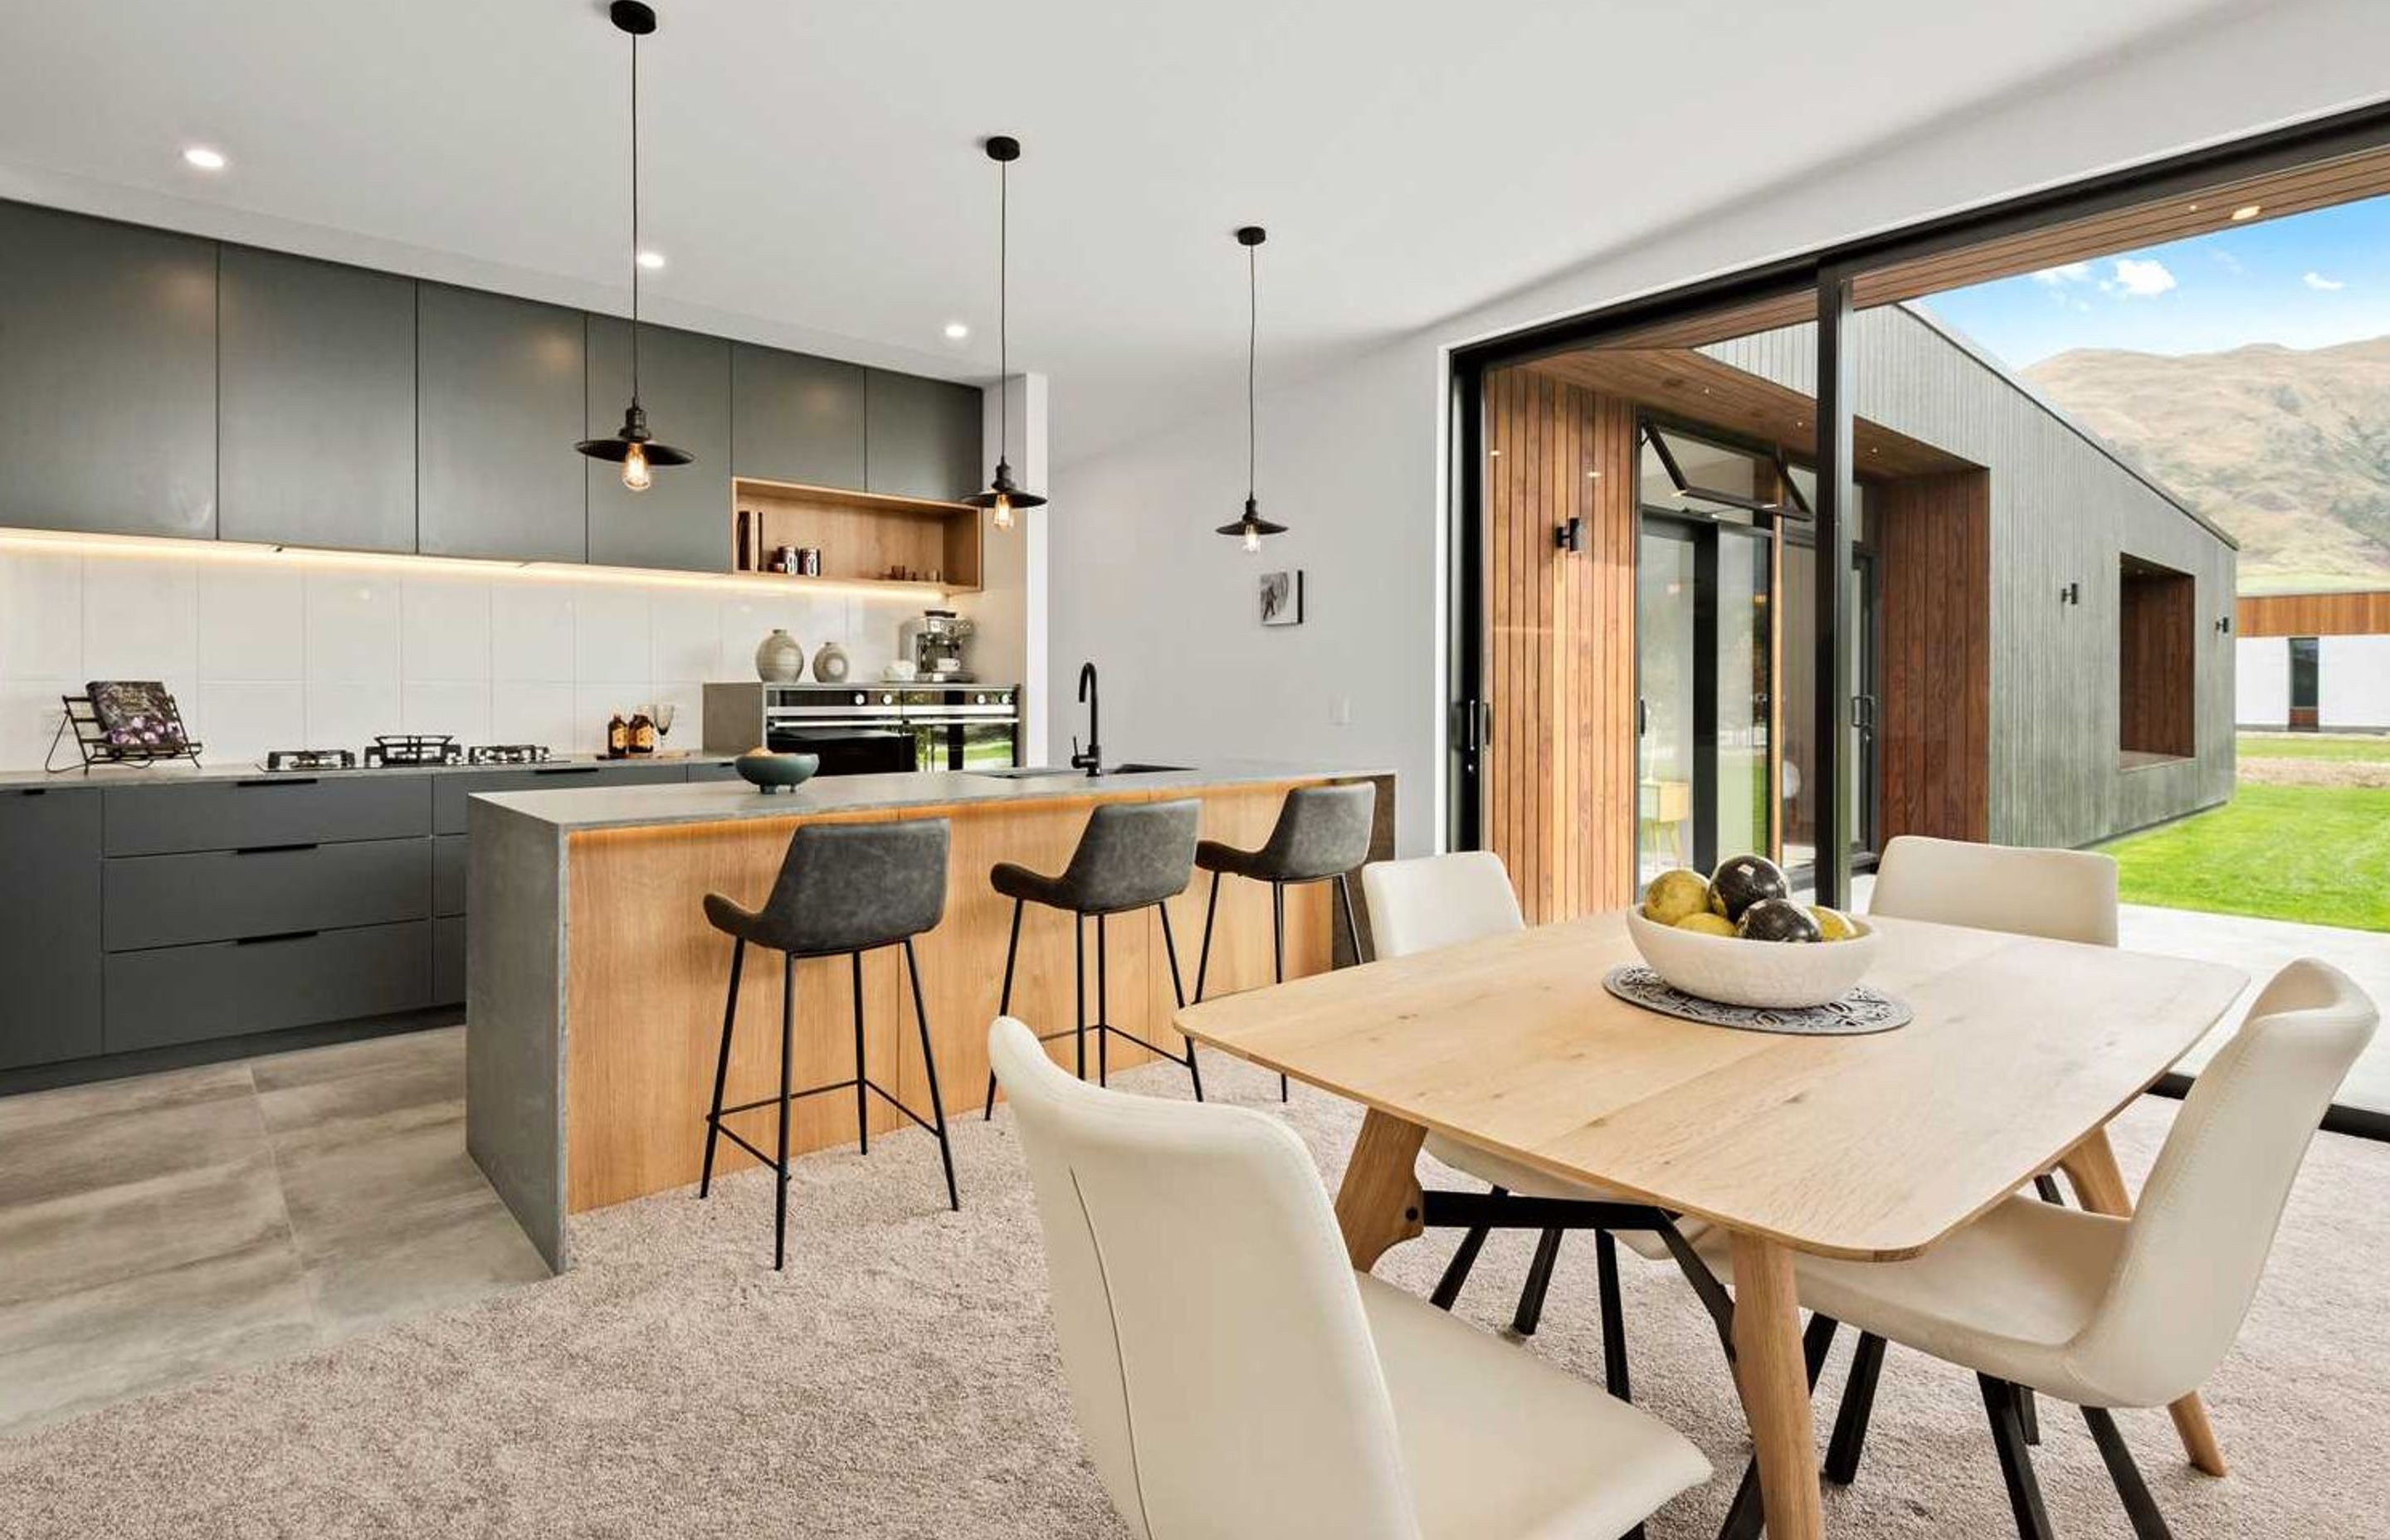 A differently configured kitchen and dining area in one of the other homes.